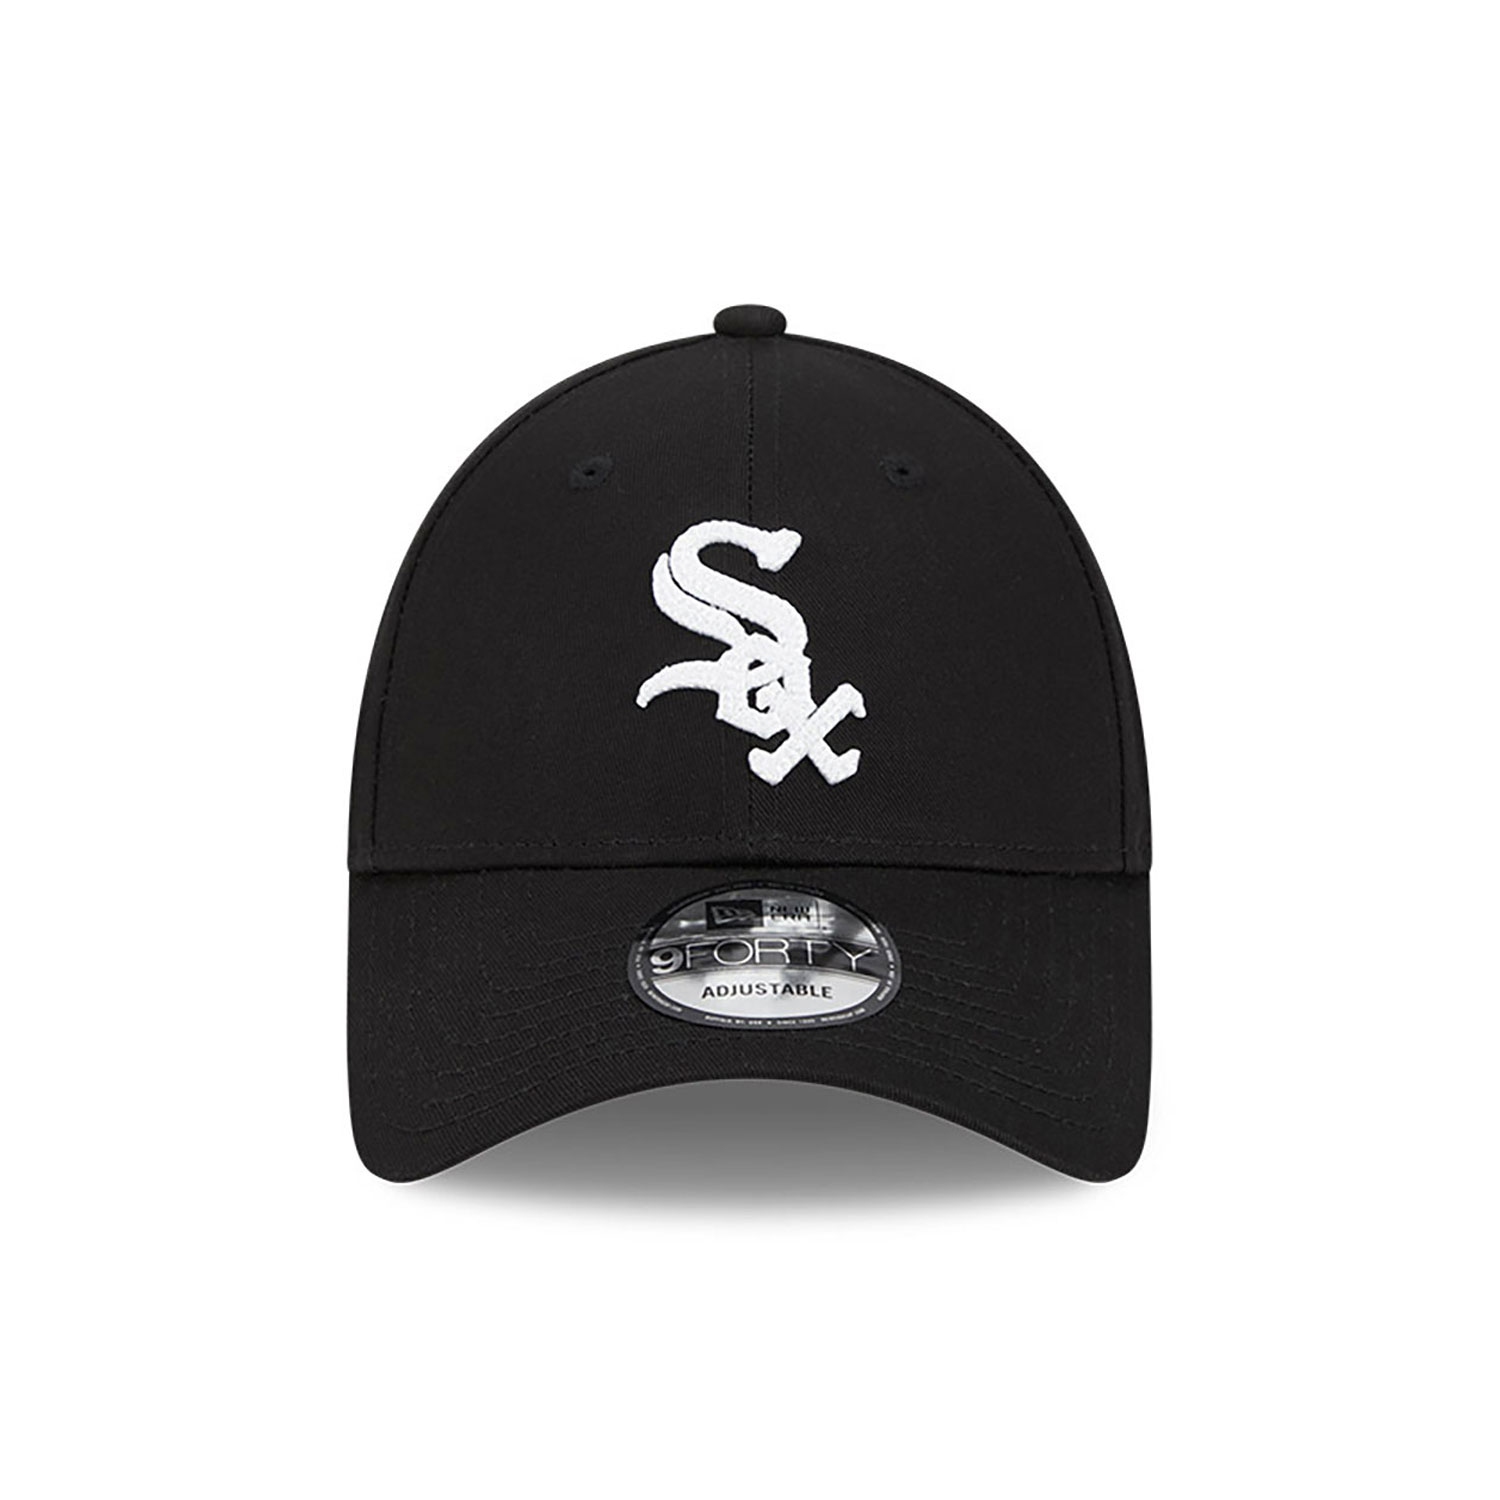 Chicago White Sox New Traditions Black 9FORTY Adjustable Cap